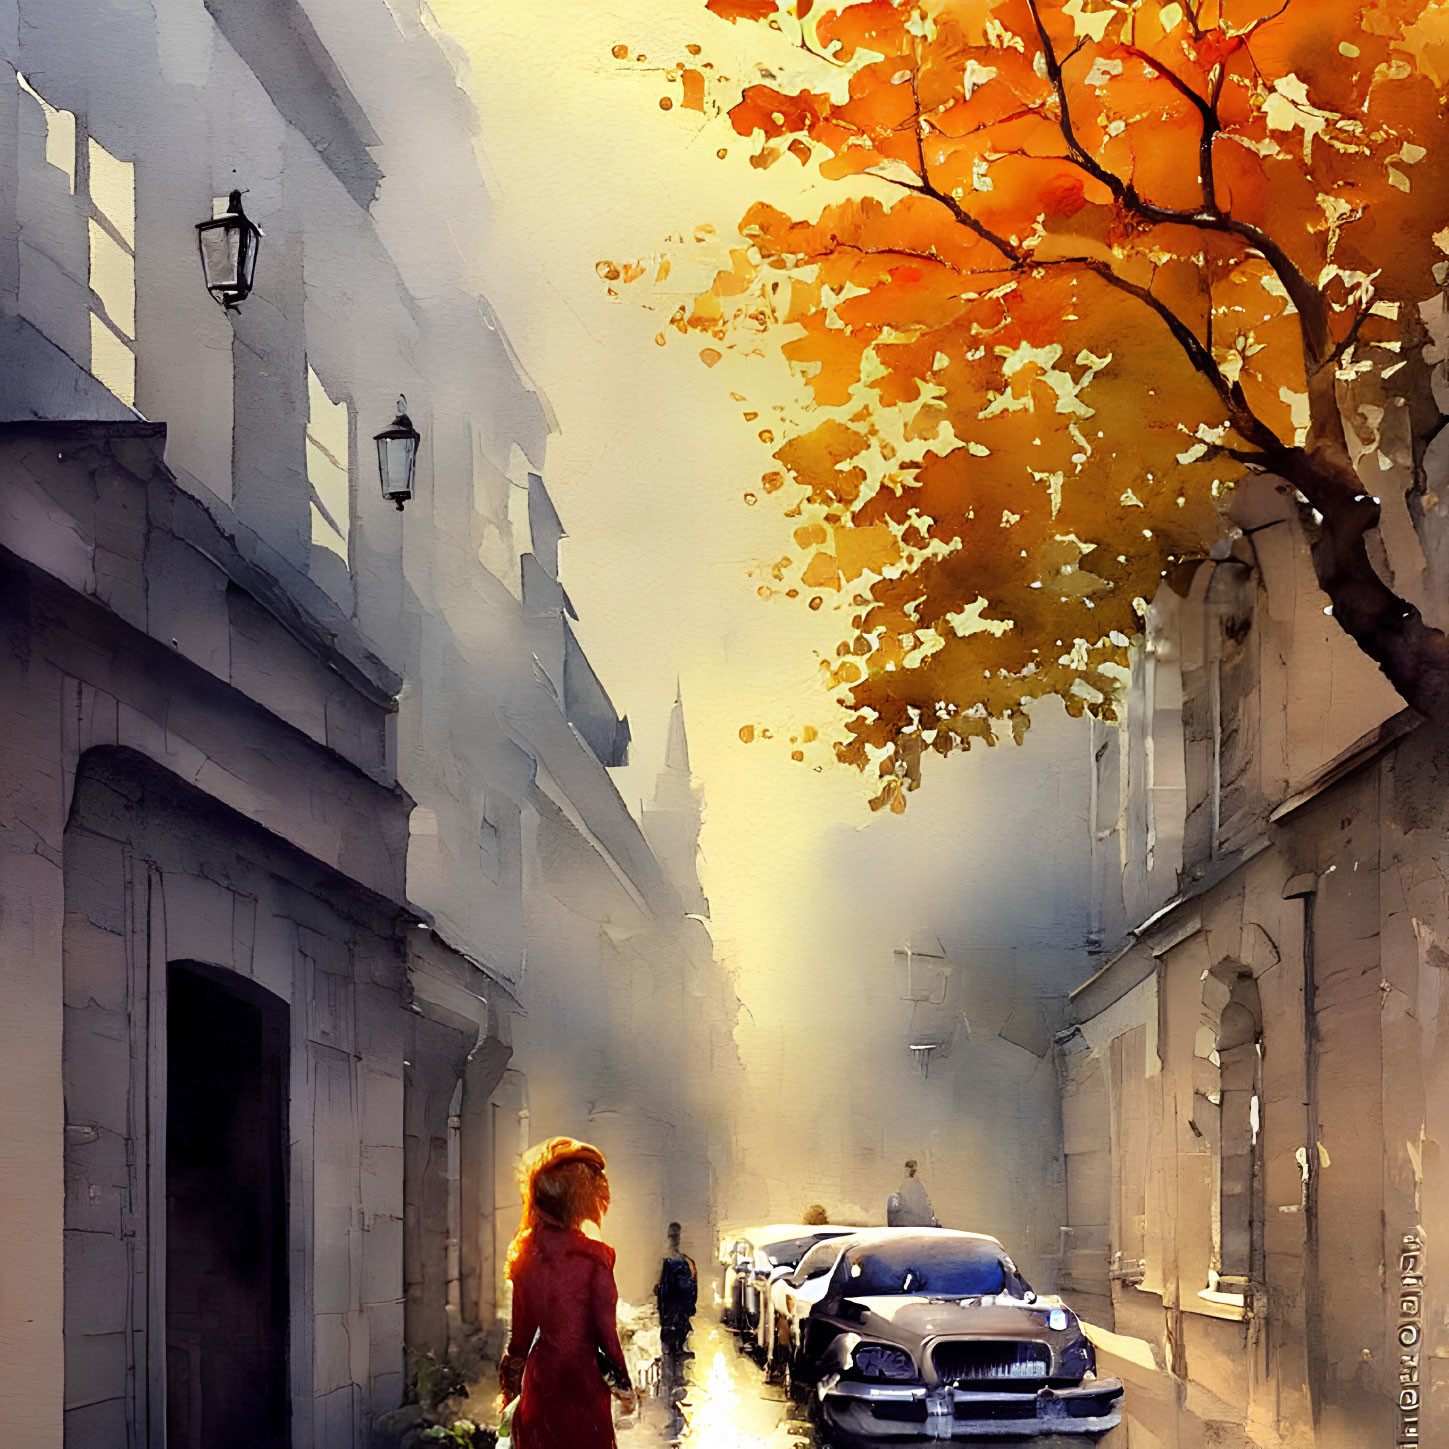 Person walking on sunlit street with vintage cars, autumn trees, and street lamps in golden-hued